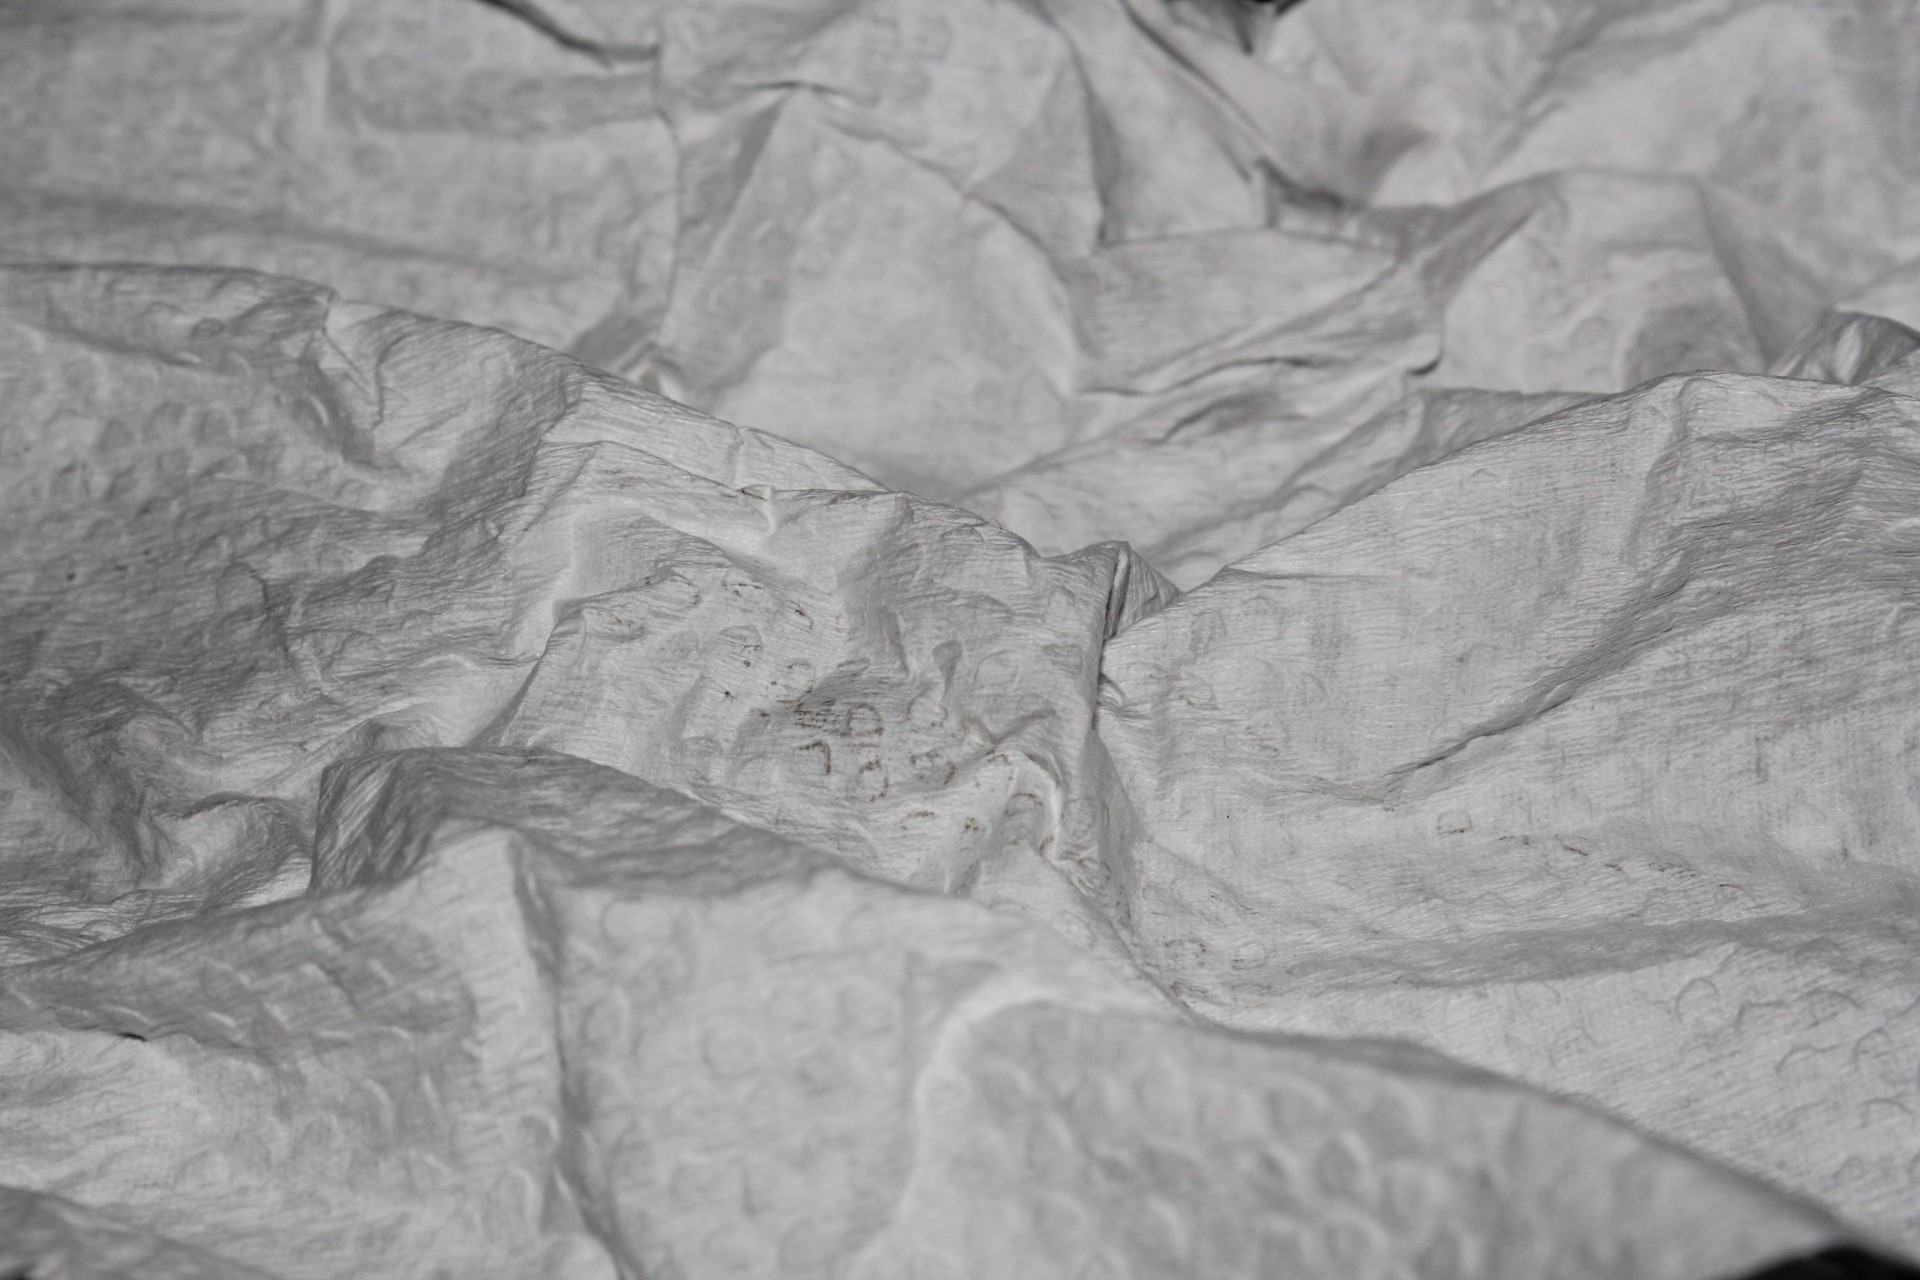 Download free photo of Tissue paper,crumpled tissue paper,paper,white paper,crumpled  paper - from 